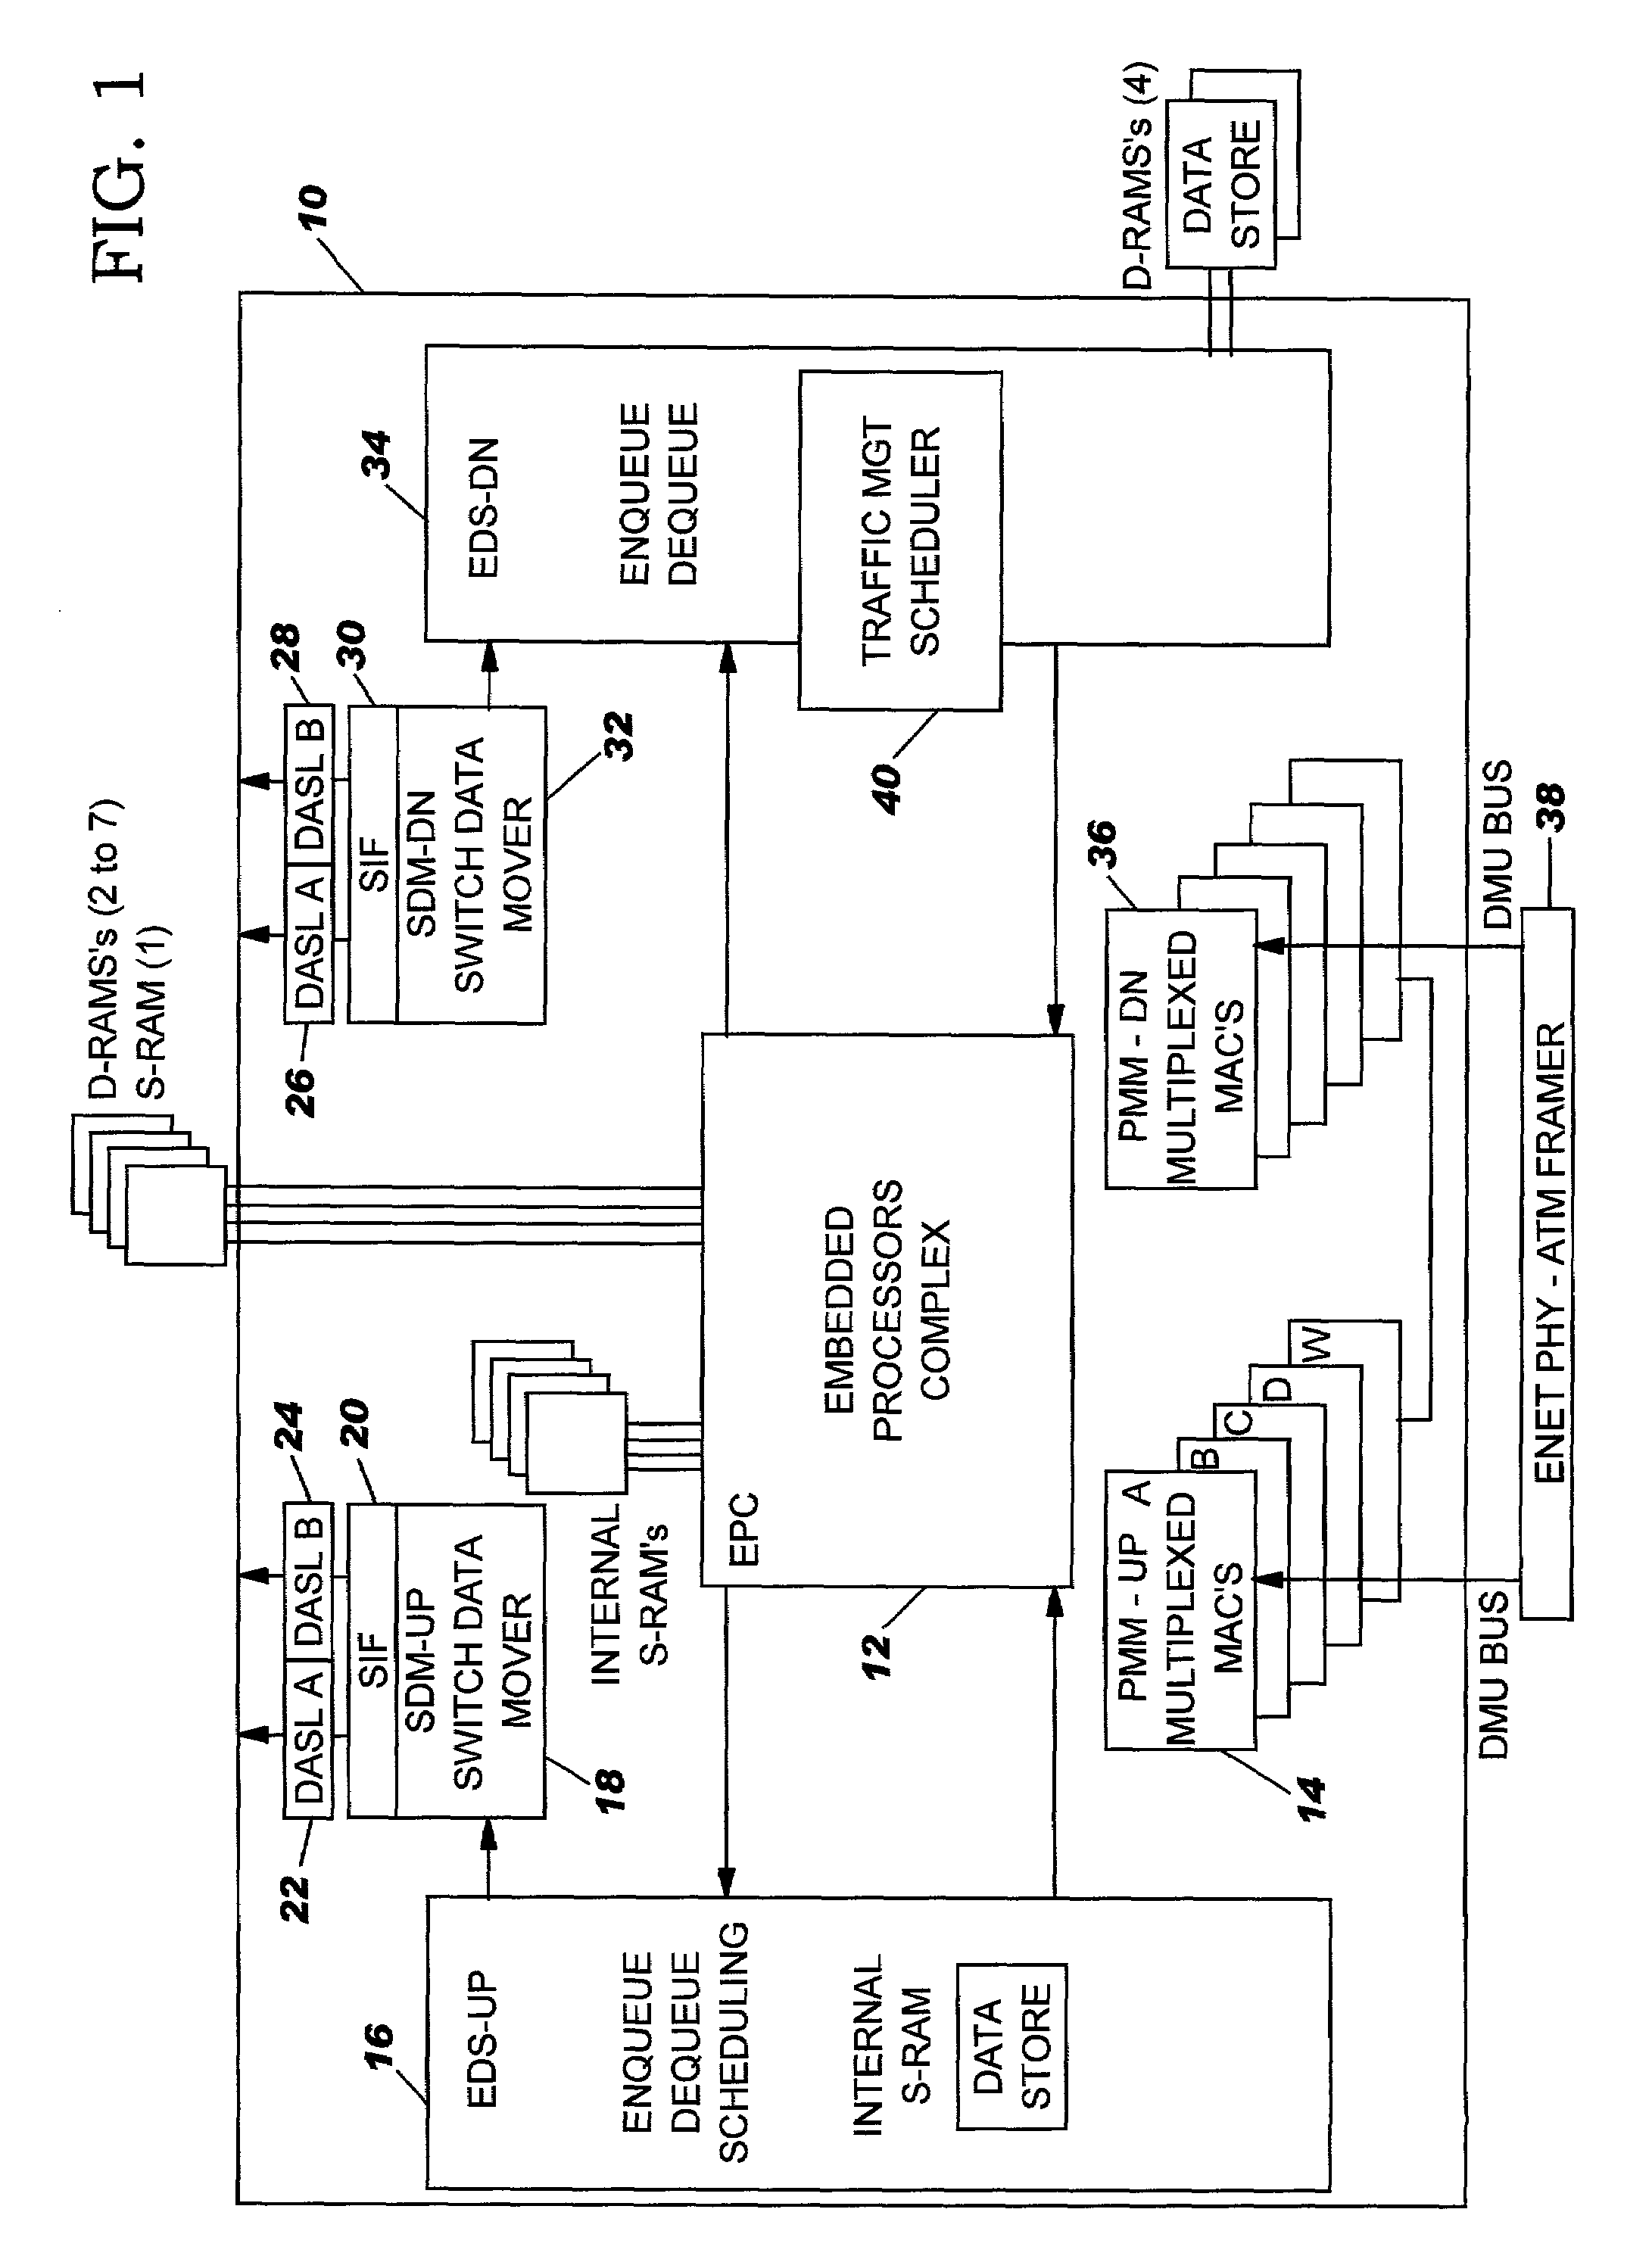 Method and system for network processor scheduling based on service levels